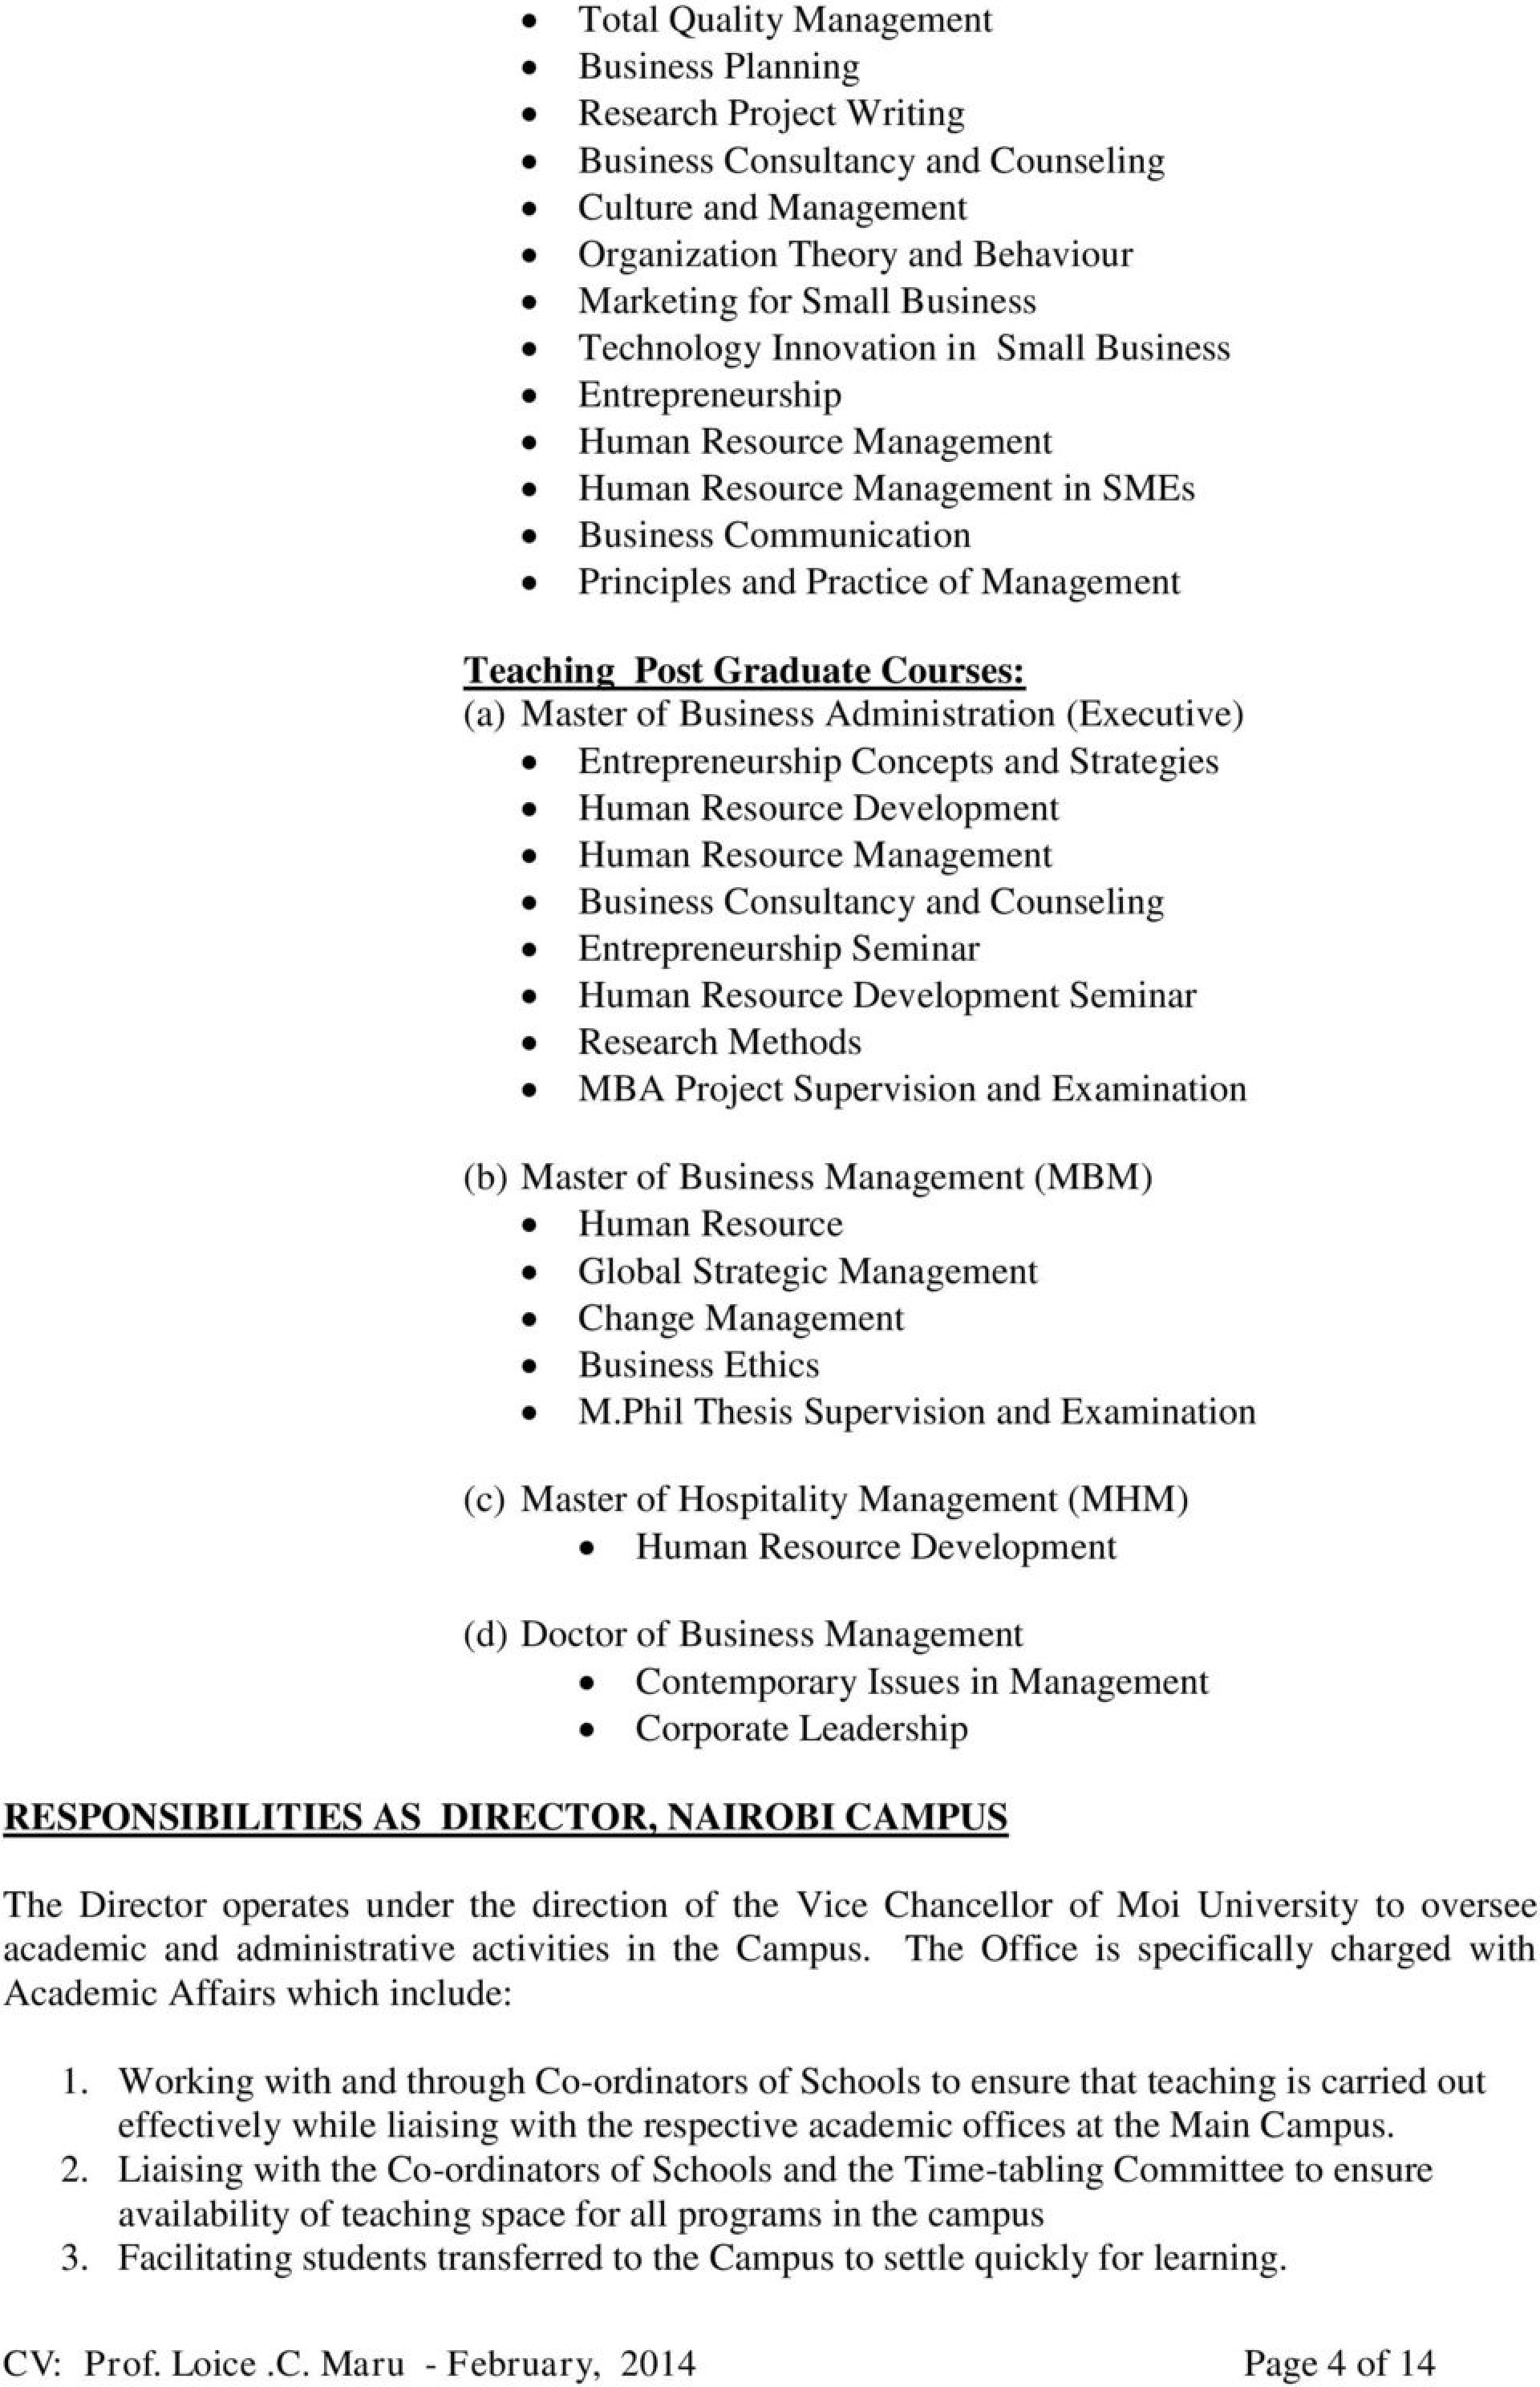 MBA courses 5-021-page-4-dissertation-topics-for-mba-hr-1920x2976.jpg